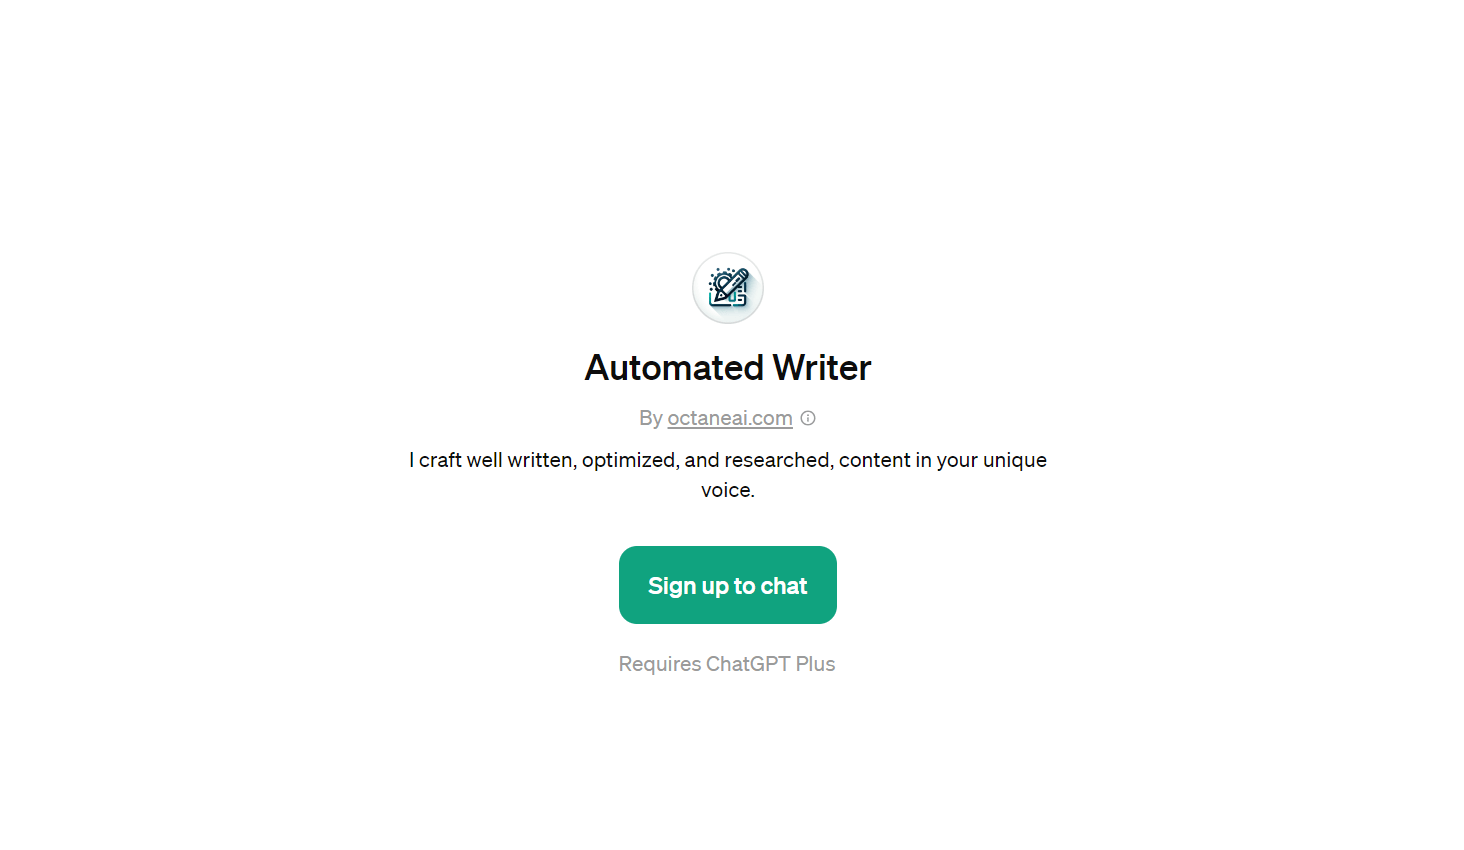 Automated Writer - Generate Written Content in Your Own Voice